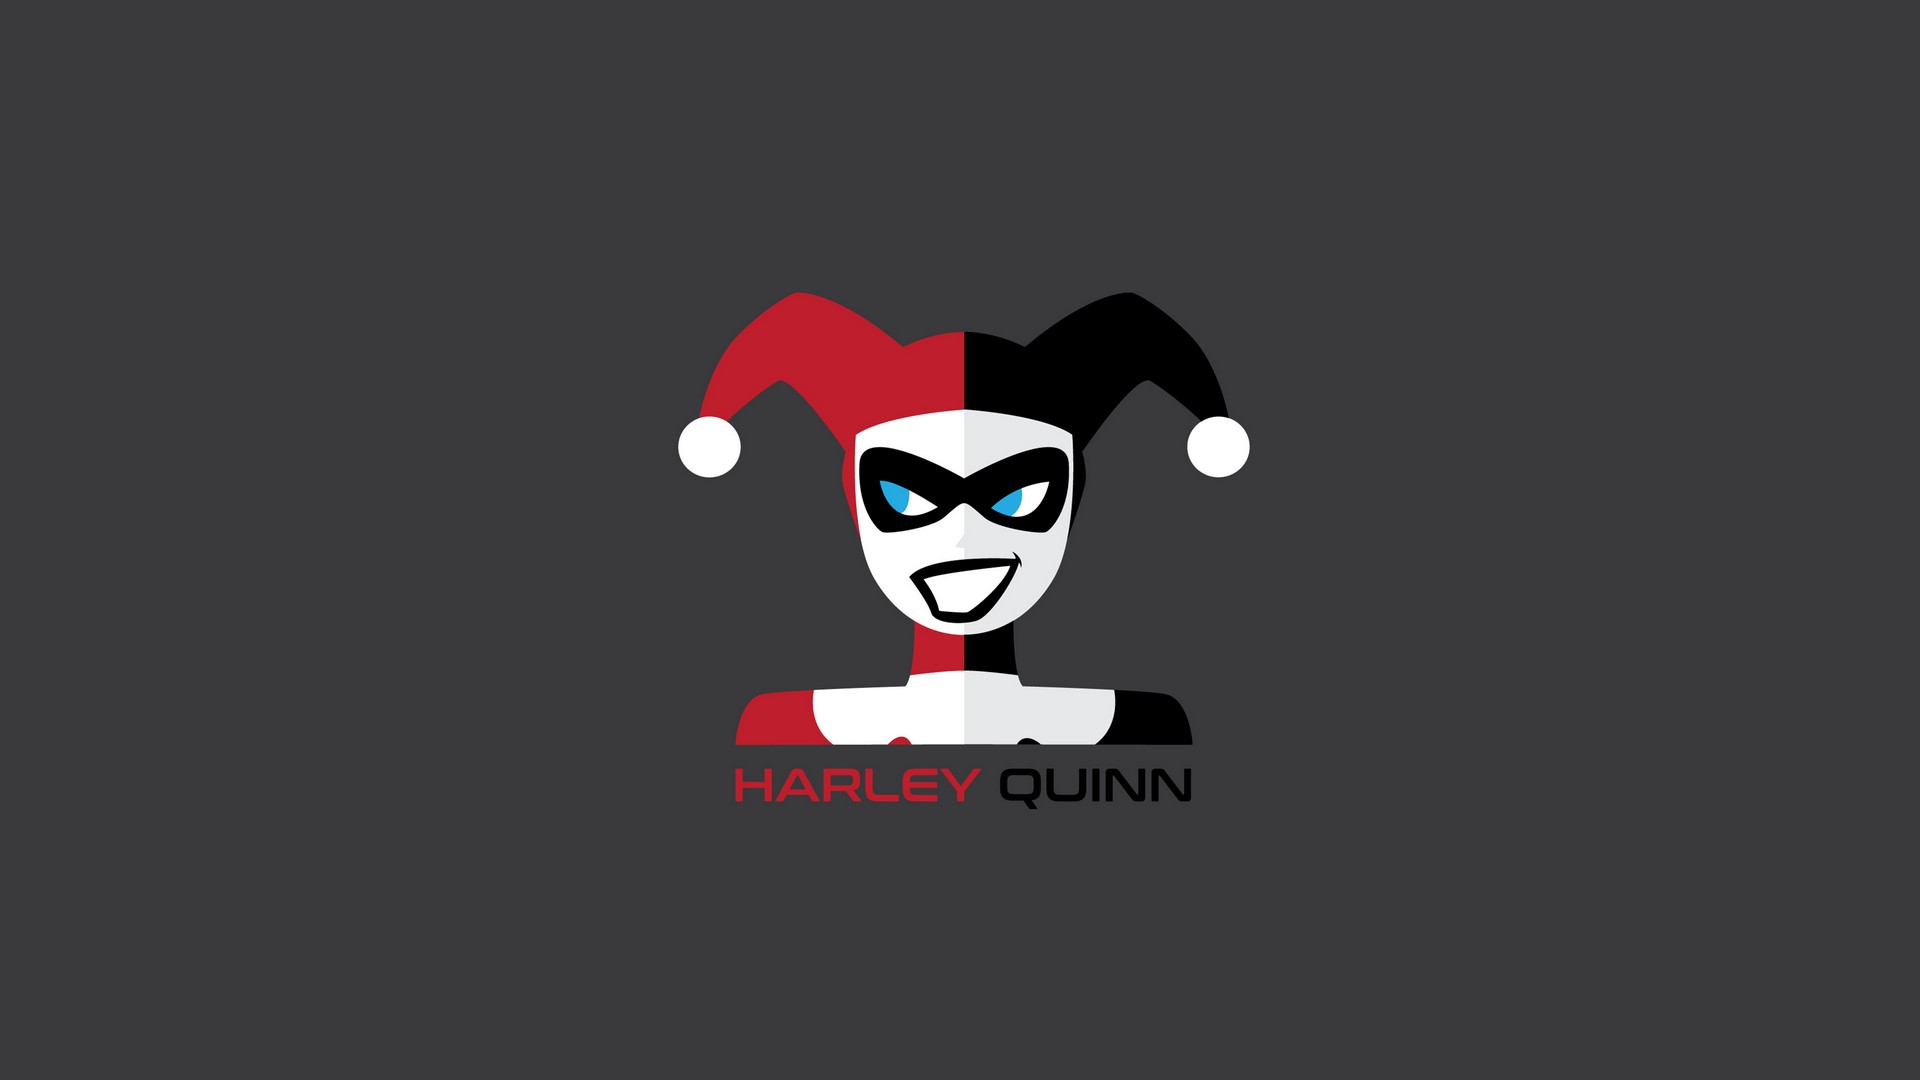 Harley Quinn Desktop Backgrounds HD with image resolution 1920x1080 pixel. You can use this wallpaper as background for your desktop Computer Screensavers, Android or iPhone smartphones